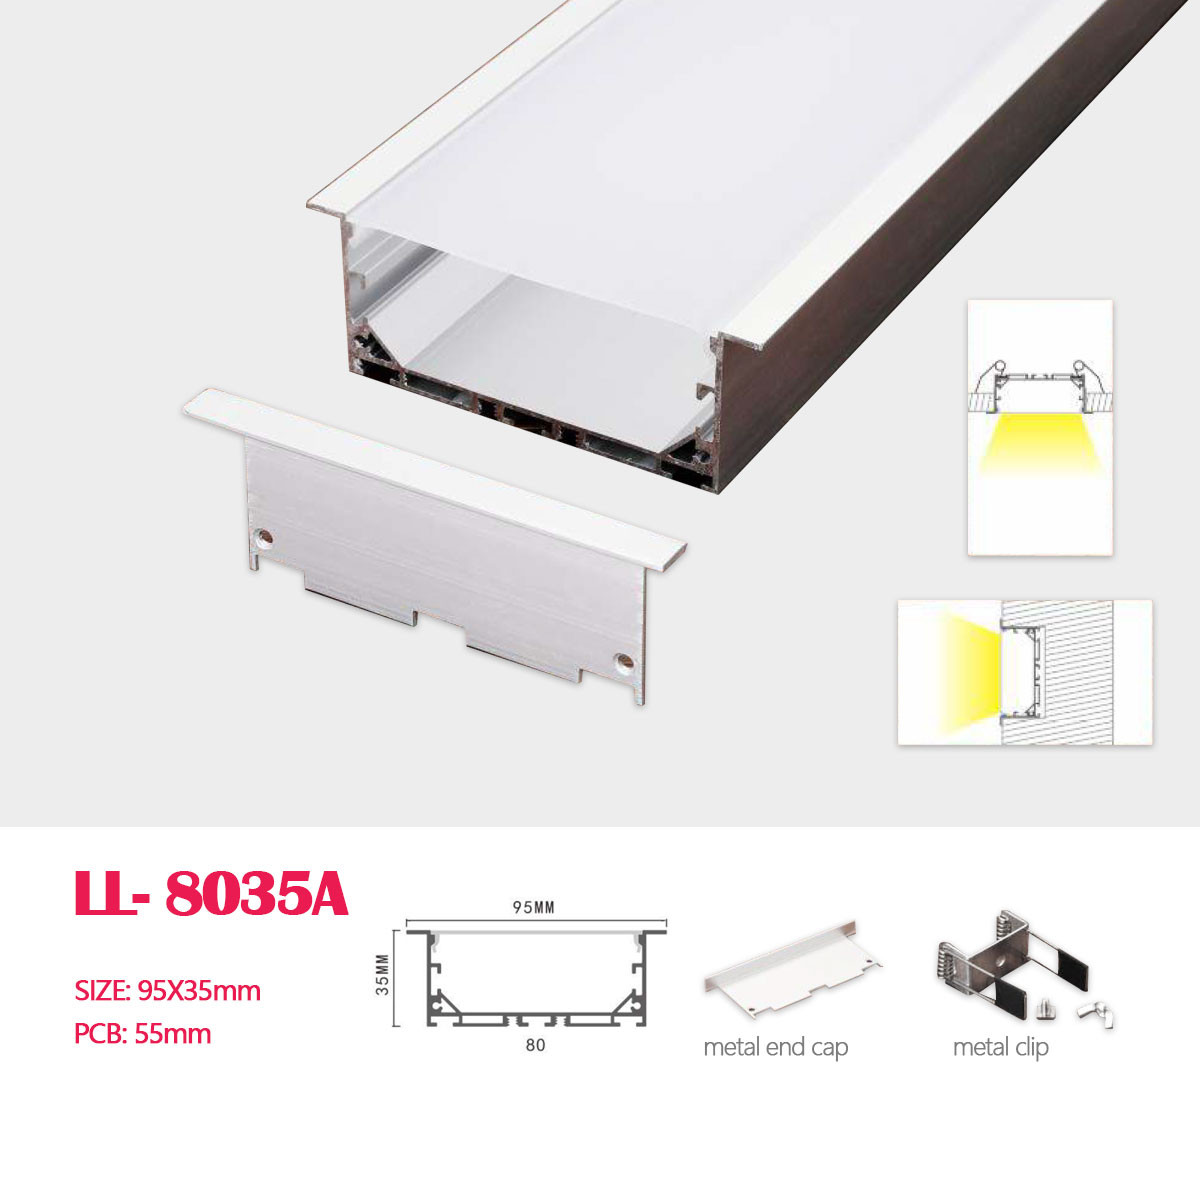 1M (3.28FT) 95MM*35MM Square ExtrudedAluminum Profile with Flat PC cover and clips, Pendant Hardware for Recessed LED Linear Light